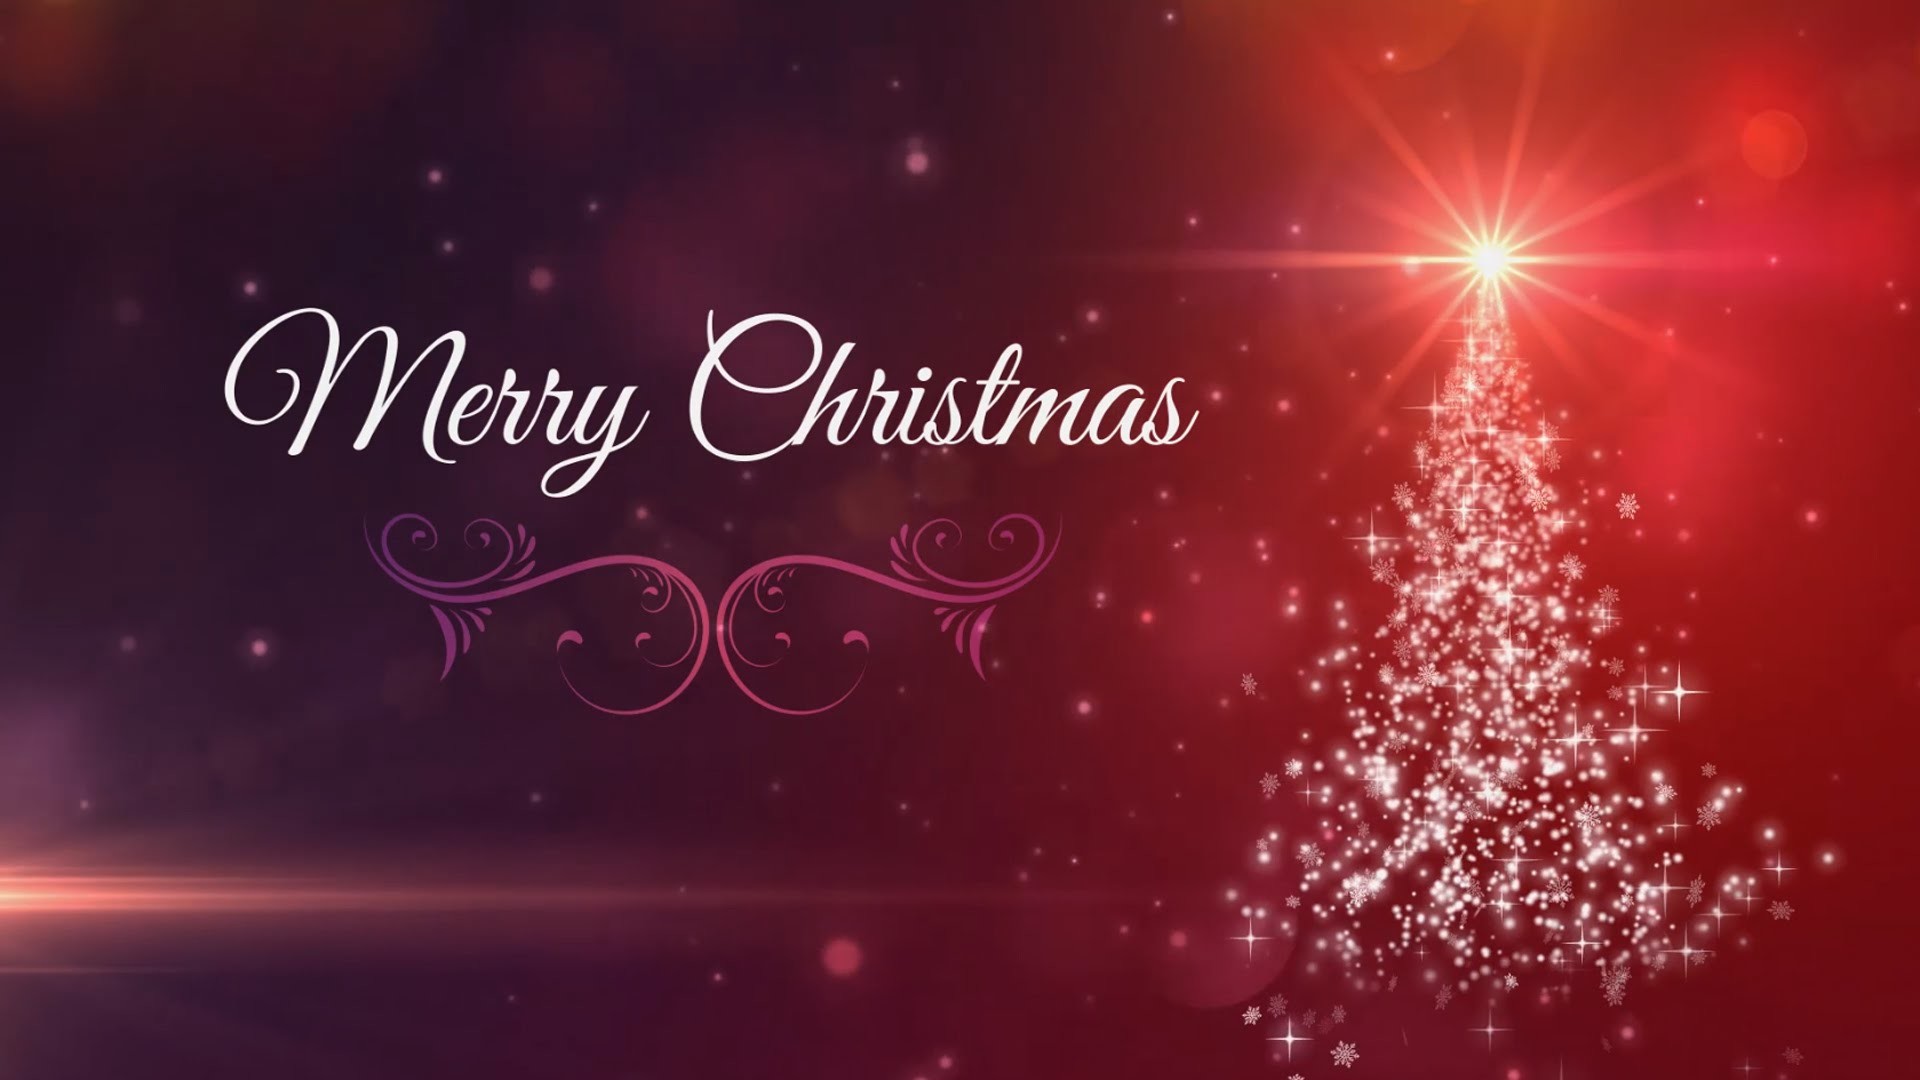 1920x1080 God Bless You Christmas Candles Wallpapers HD Wallpapers